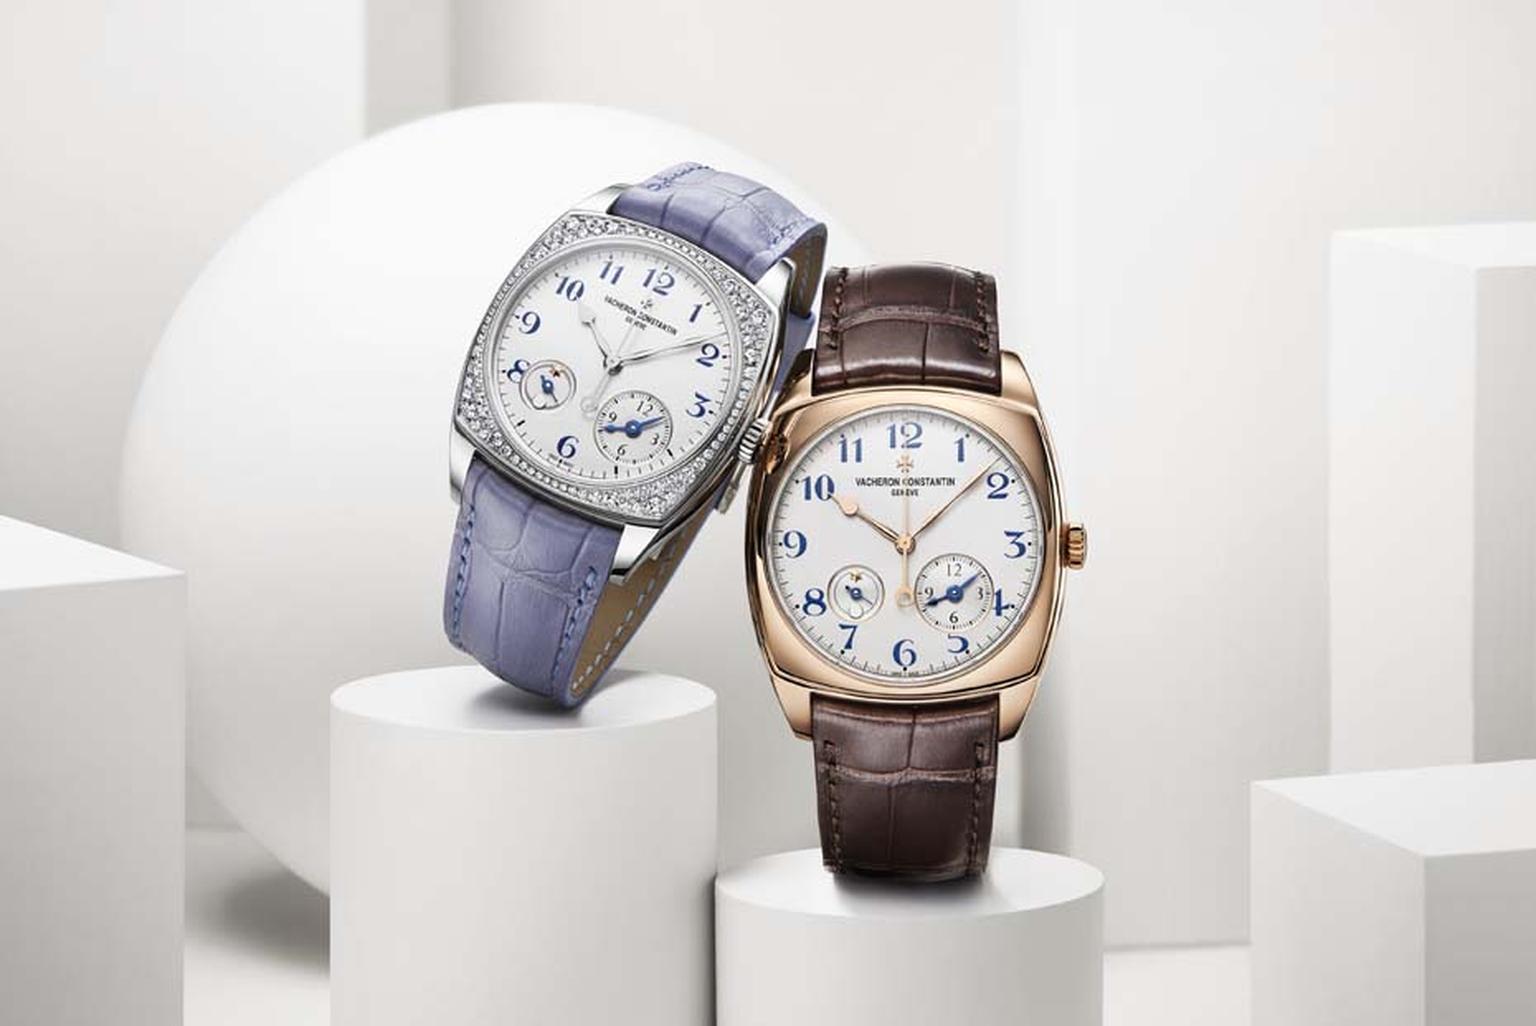 Travel has become an integral part of our lifestyle and a dual-time function is one of the most useful allies on board. As part of the Harmony collection, two dual-time models for men and one for women complete the inaugural party.